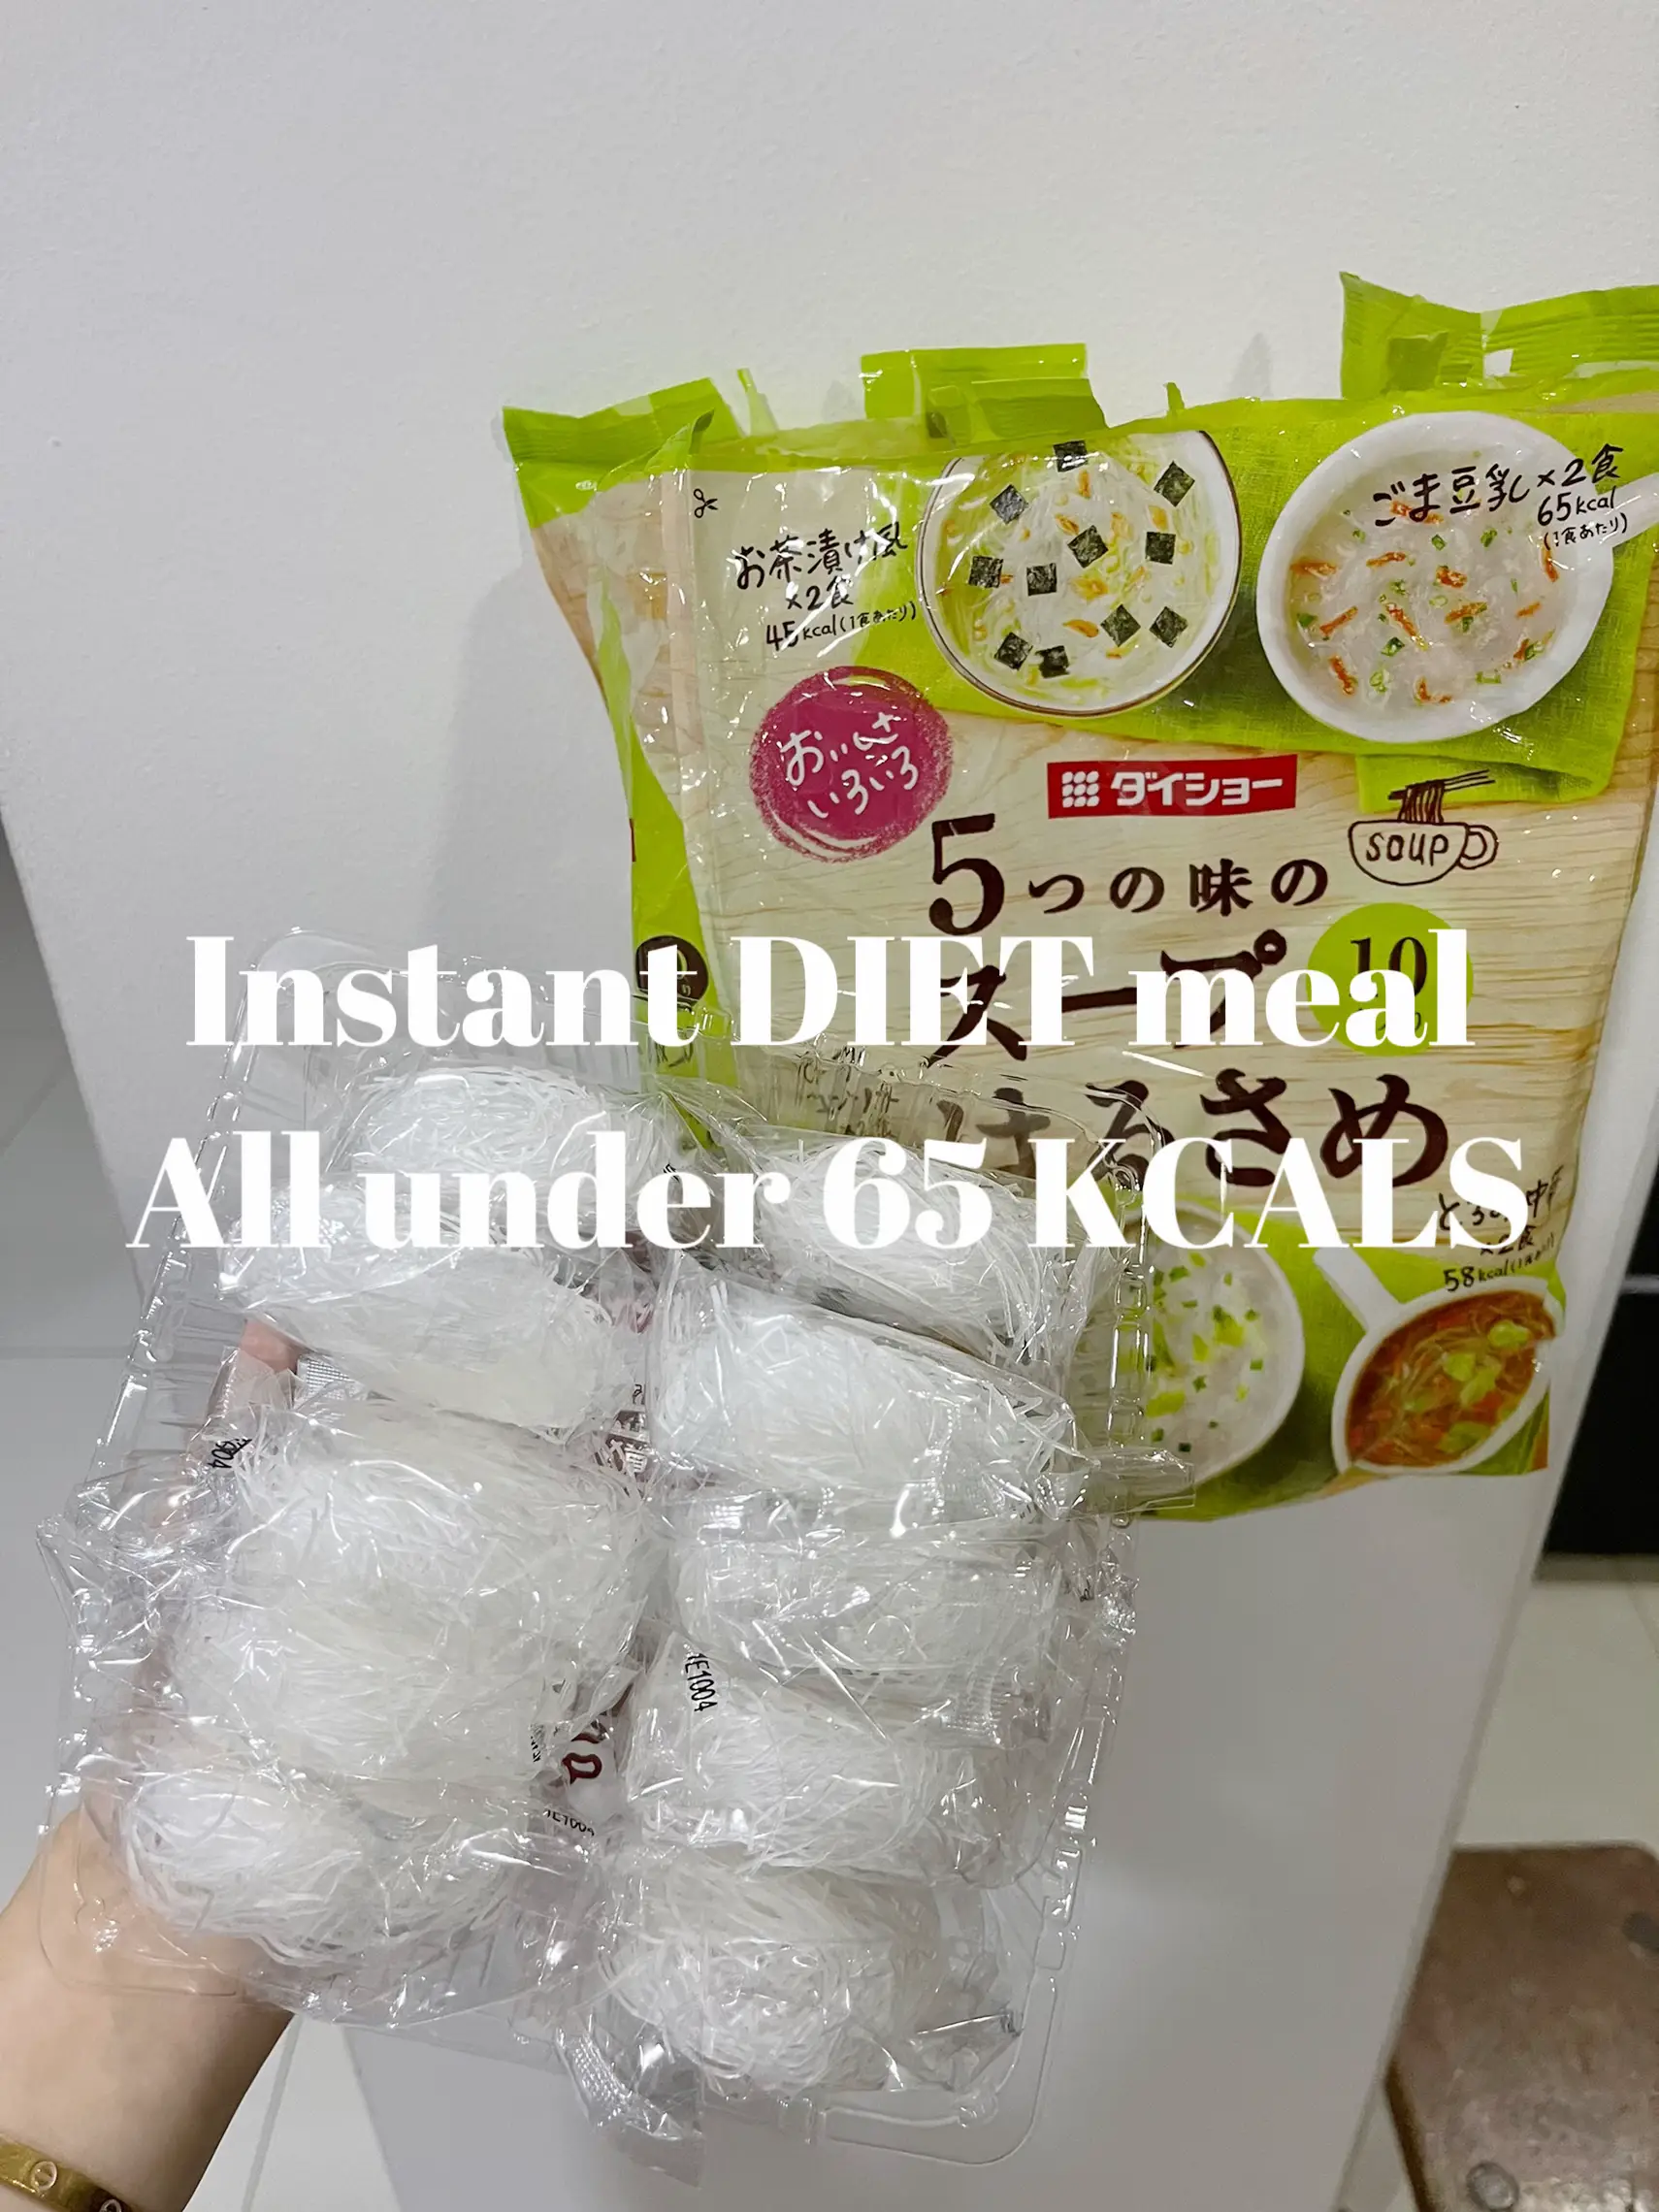 Mini instant noodle to curb cravings while on diet's images(0)